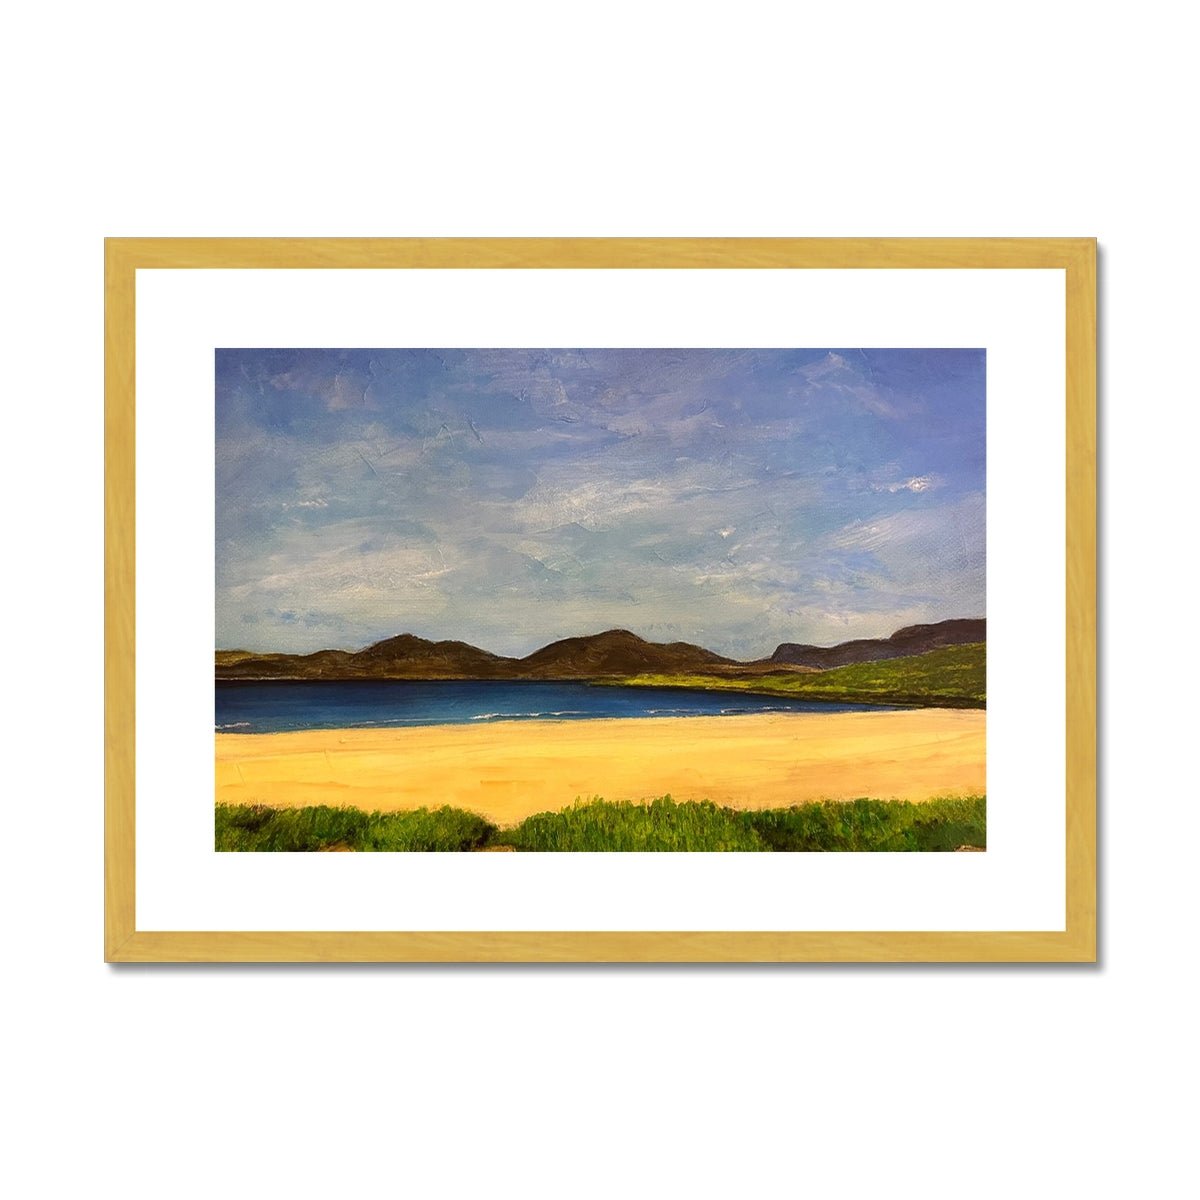 Luskentyre Beach Harris Painting | Antique Framed & Mounted Prints From Scotland-Antique Framed & Mounted Prints-Hebridean Islands Art Gallery-A2 Landscape-Gold Frame-Paintings, Prints, Homeware, Art Gifts From Scotland By Scottish Artist Kevin Hunter